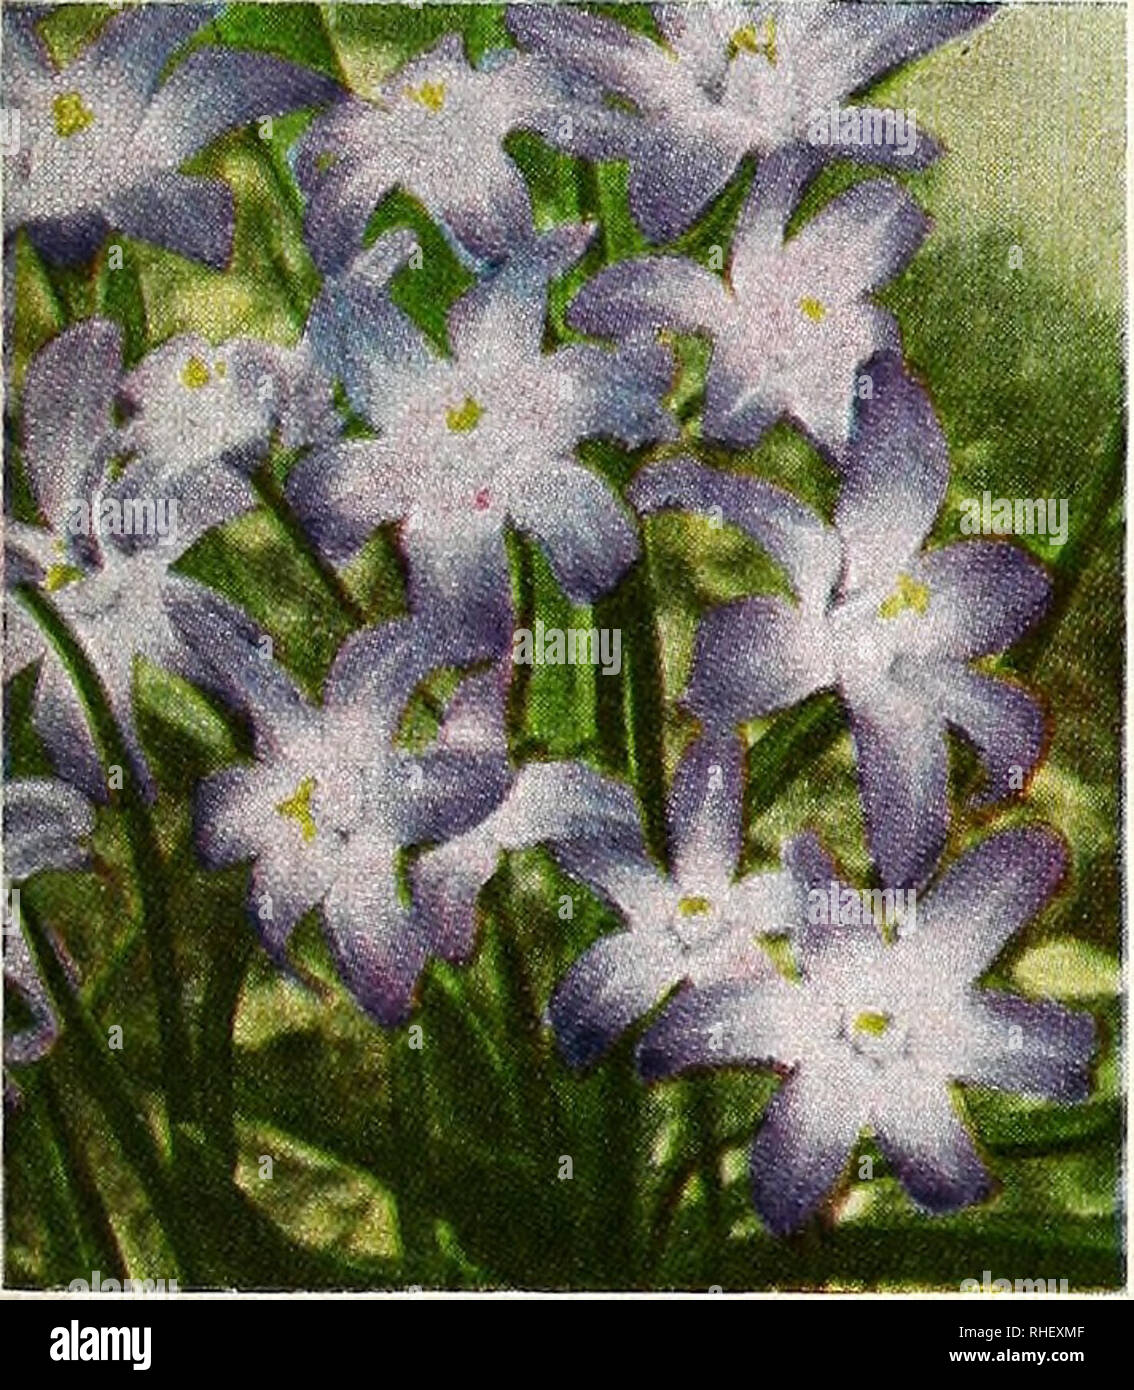 . Bolgiano's fall 1967. Nurseries (Horticulture) Catalogs; Bulbs (Plants) Catalogs; Seeds Catalogs; Trees Catalogs. • MISCELLANEOUS BULBS • IRIS reticulata. Rich pansy-violet. Blooms in very early spring. About 10 inches tall. 7'5c. per doz.; 15.50 per 100. Tingitana, Wedgwood. Graceful large flowers of a beautiful deep blue color. Very early. 85c. per doz.; $6.25 per 100. IXIA (African Corn Lily). Brilliant mixture. 50c. per doz.; $3.50 per 100. IXIOLIRION Pallasii. Easily grown in any sandy border. Flowers in late May or early June; produces deep blue, tubular flowers. Height 12 inches. 60c. Stock Photo